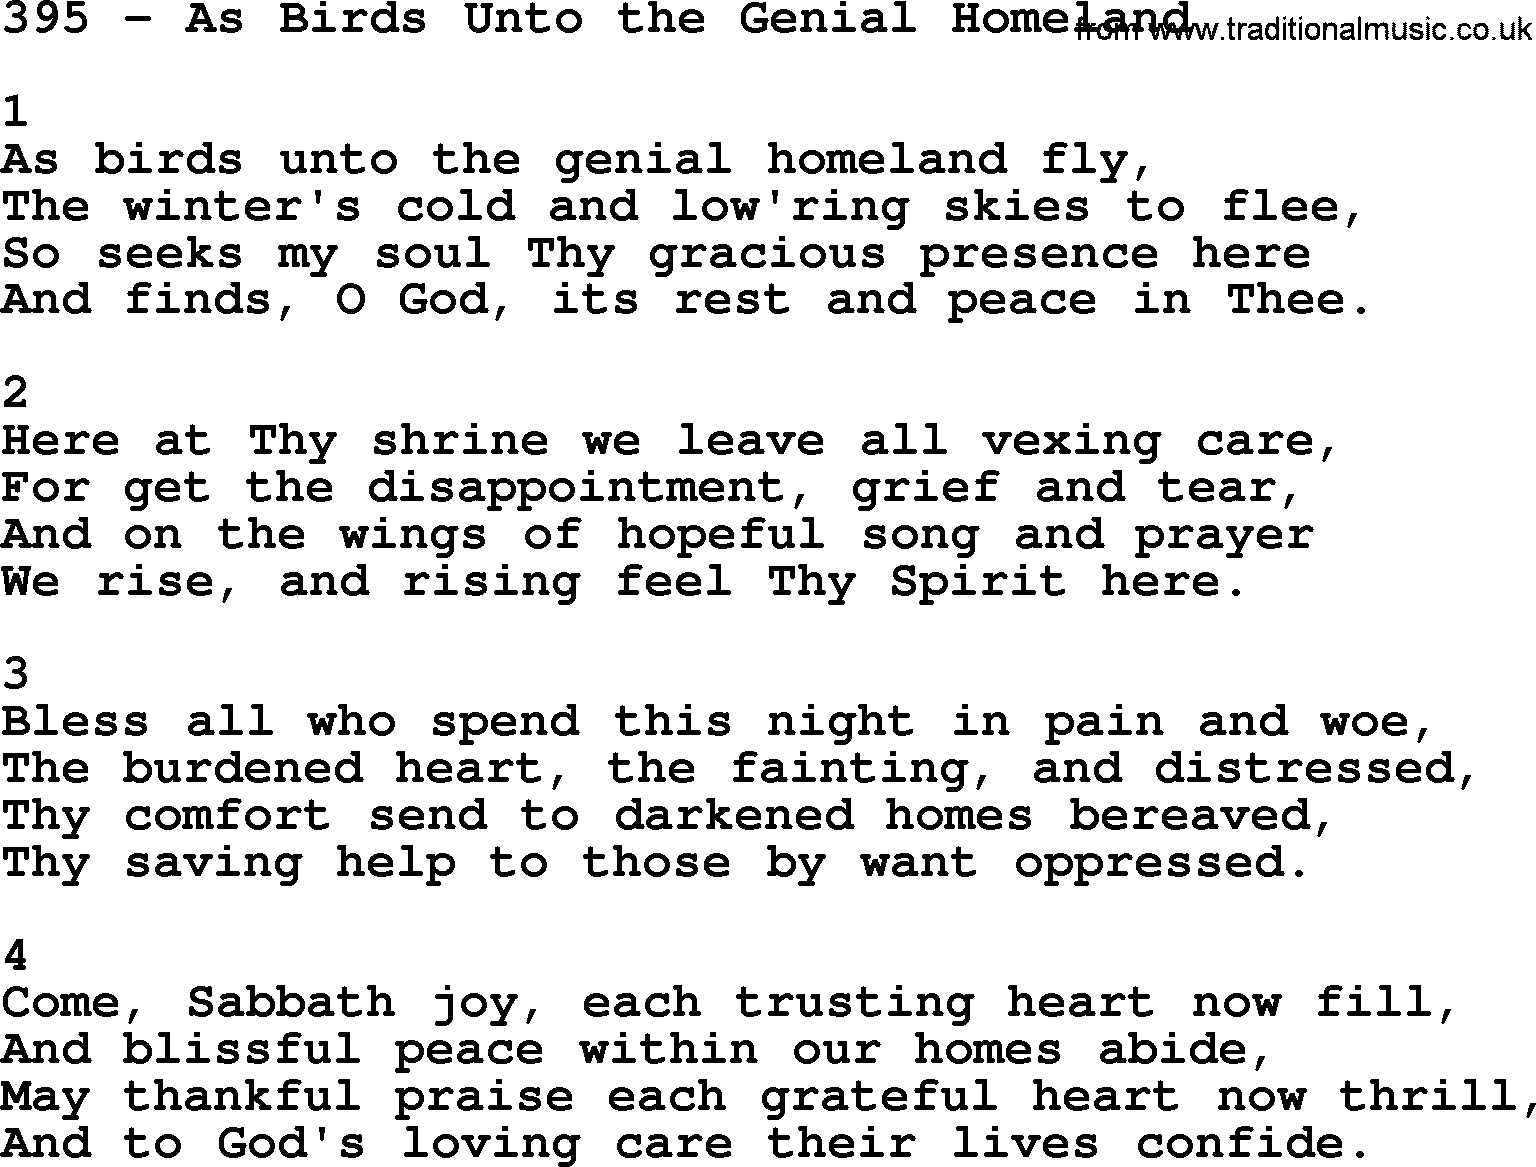 Complete Adventis Hymnal, title: 395-As Birds Unto The Genial Homeland, with lyrics, midi, mp3, powerpoints(PPT) and PDF,